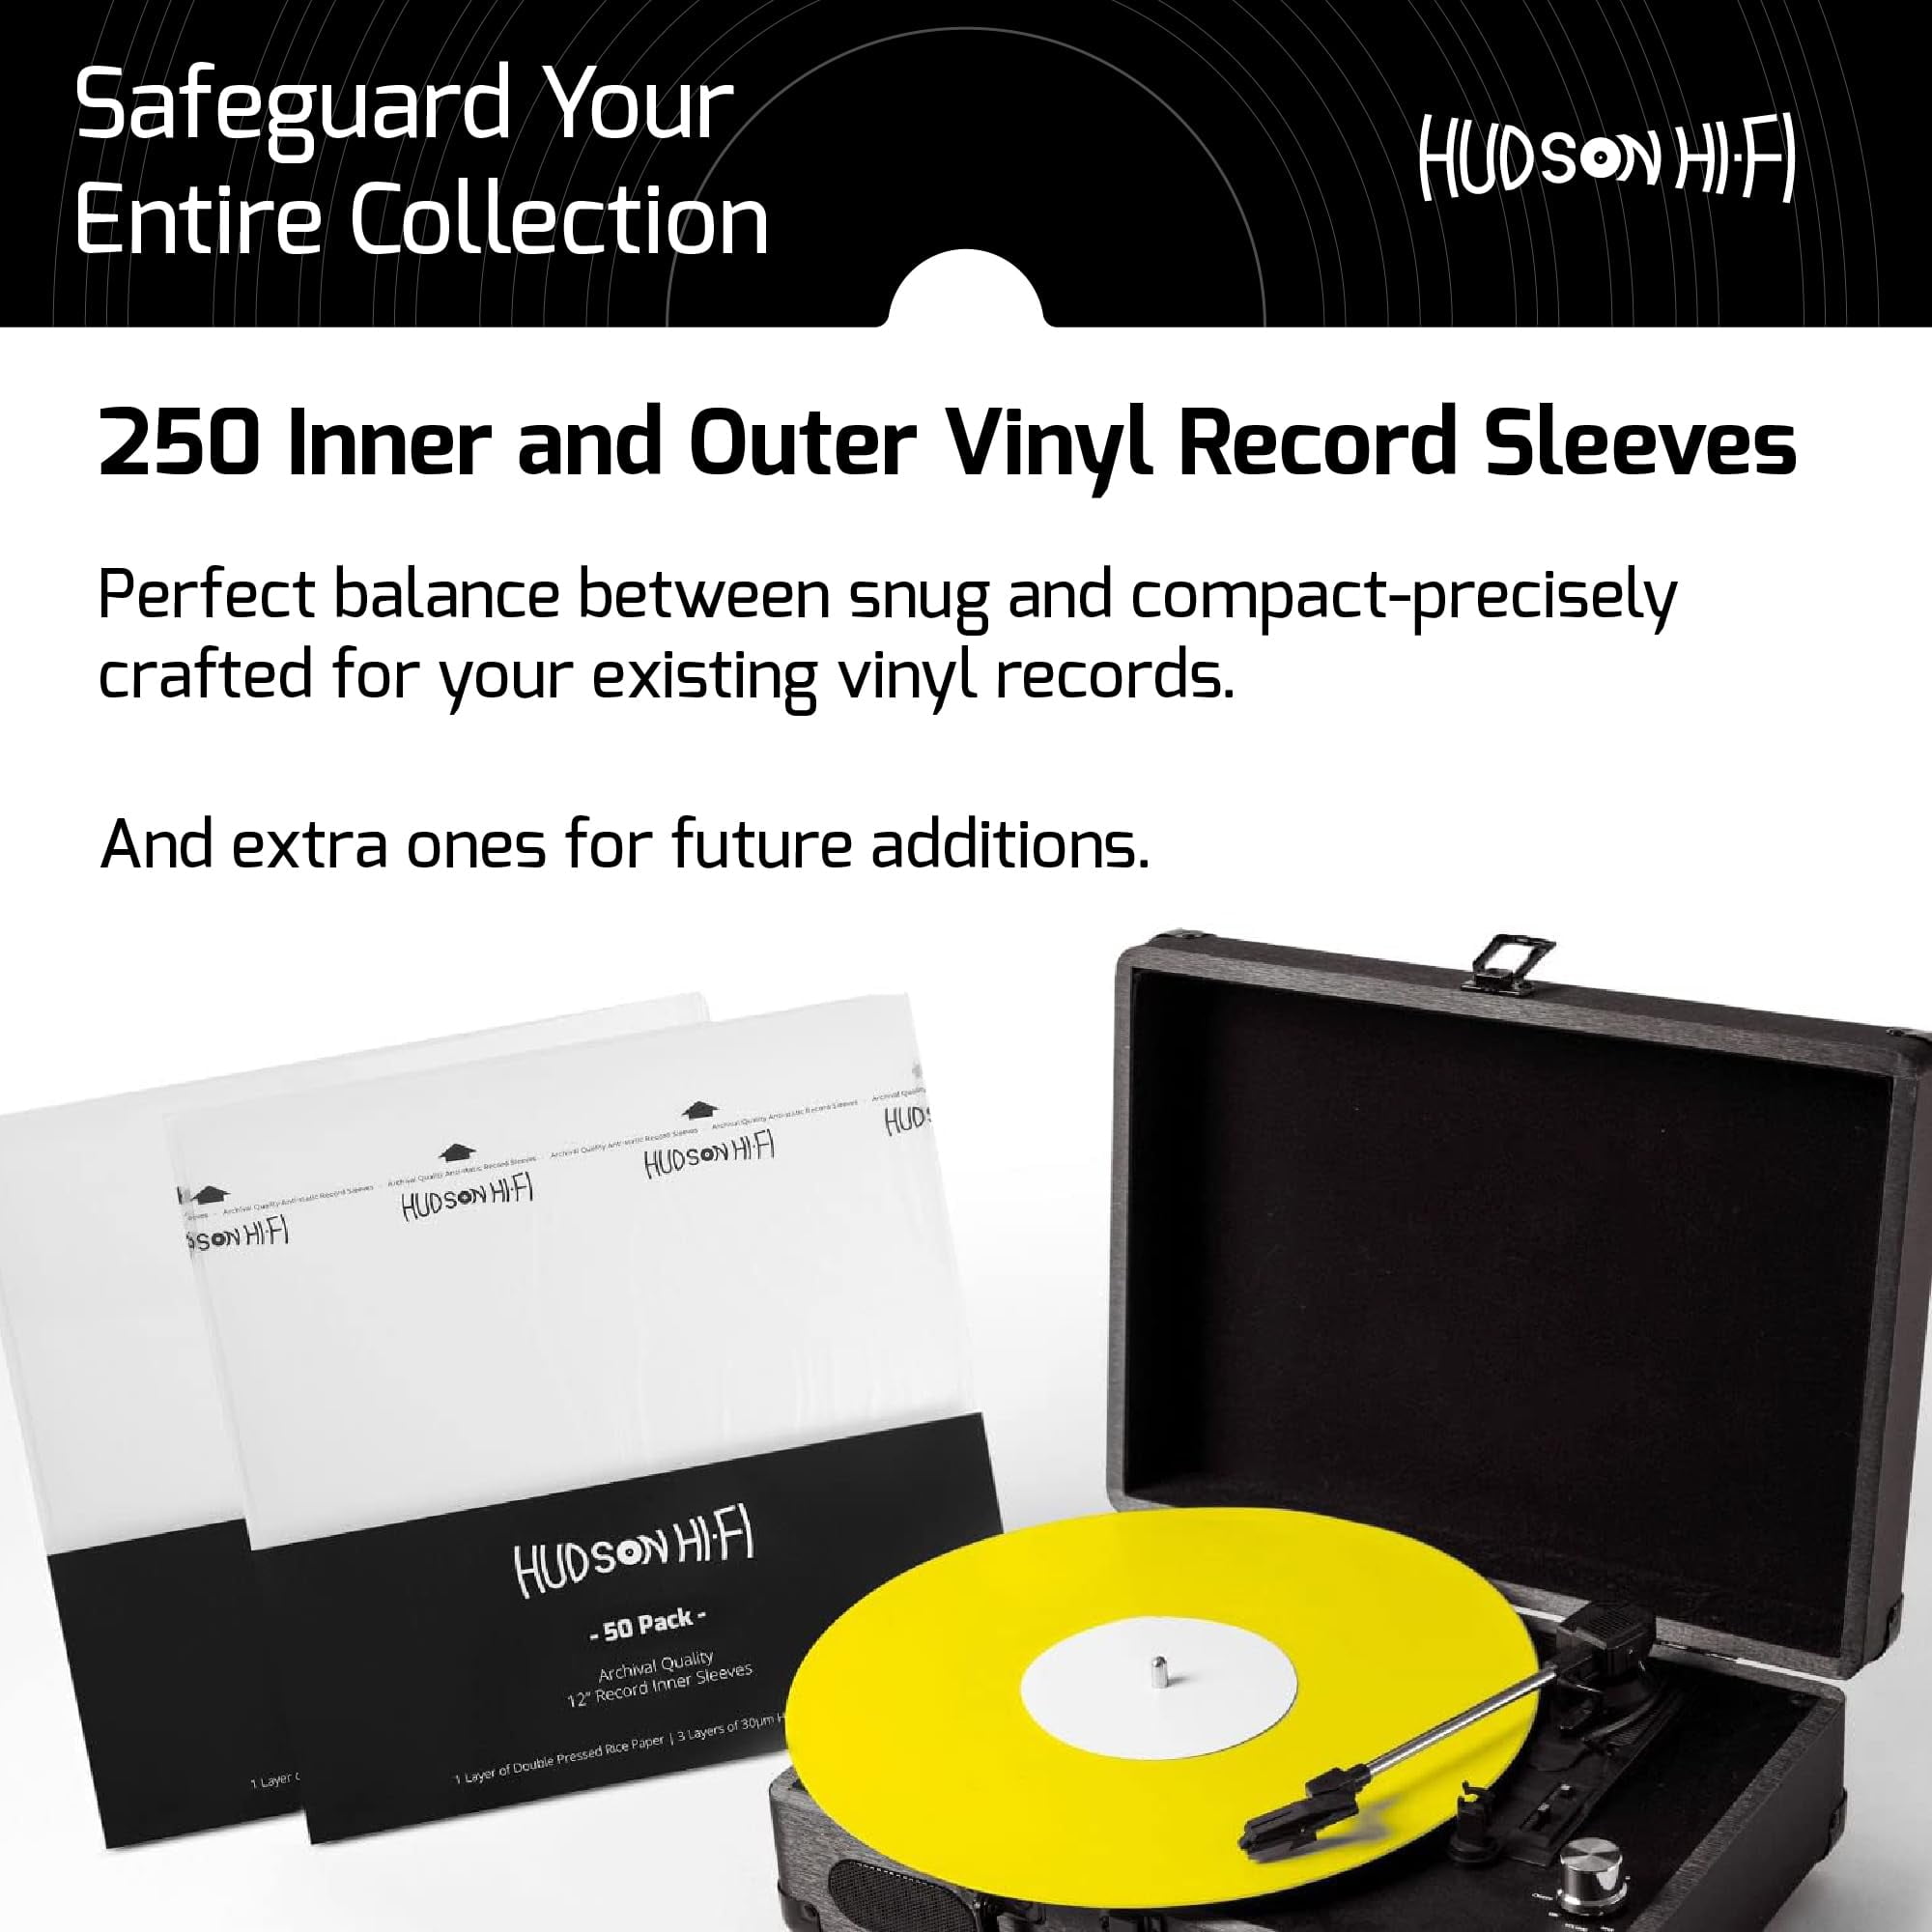 Protect your vinyl records with inner and outer sleeves. Just